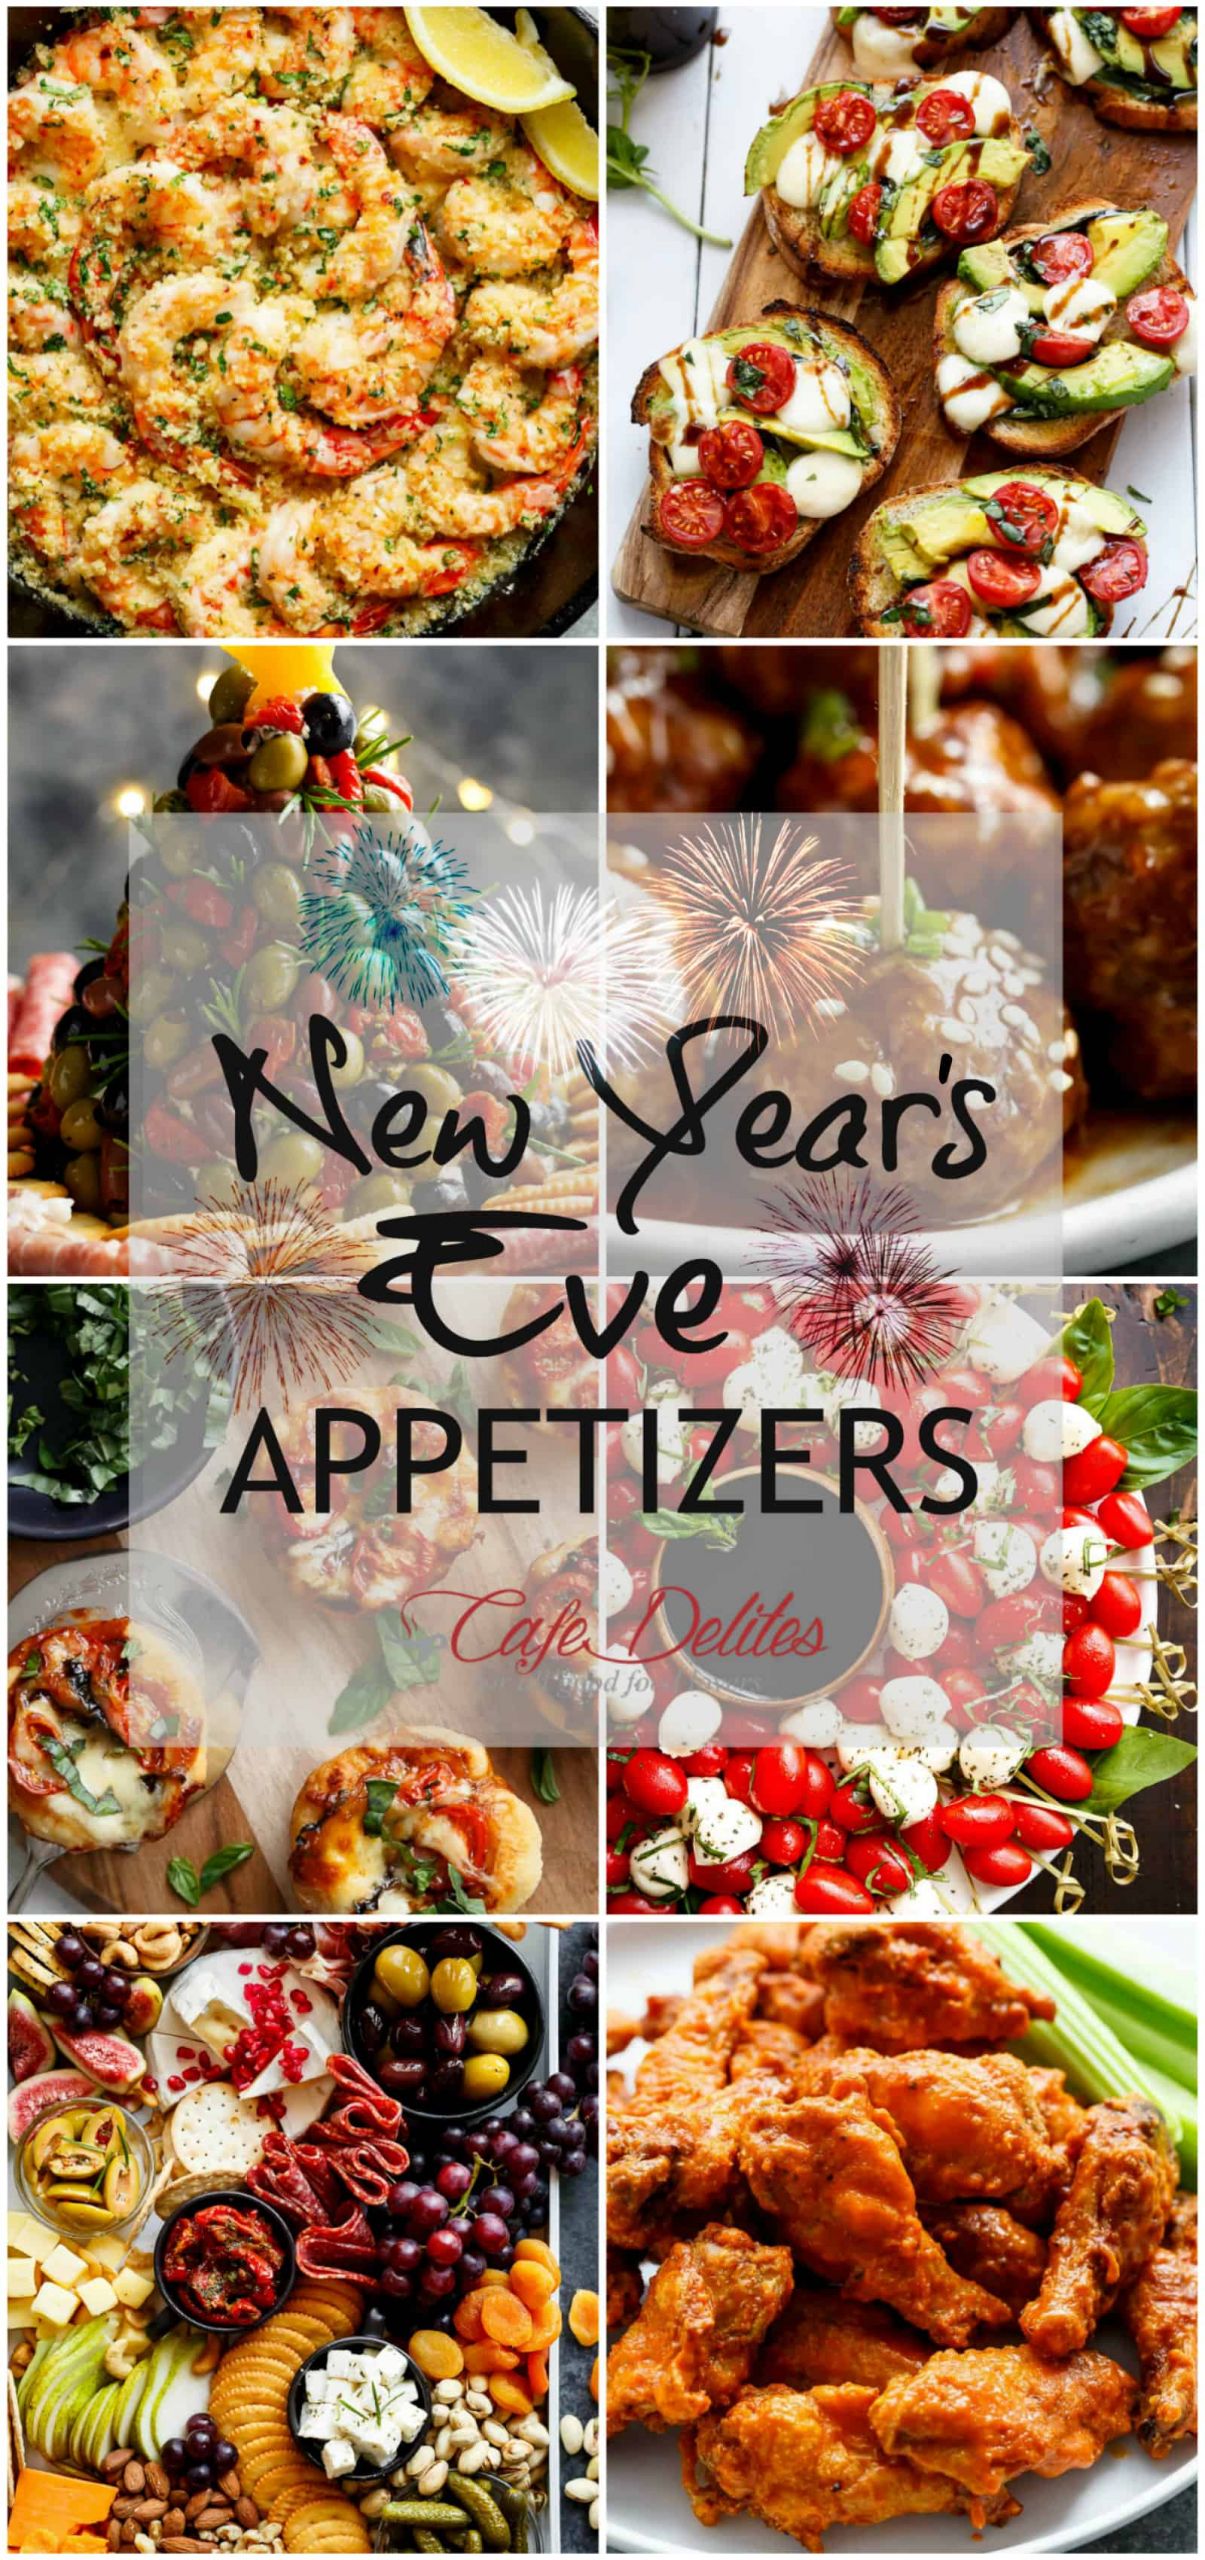 Appetizers For New Years
 The Best New Year s Eve Appetizers Cafe Delites